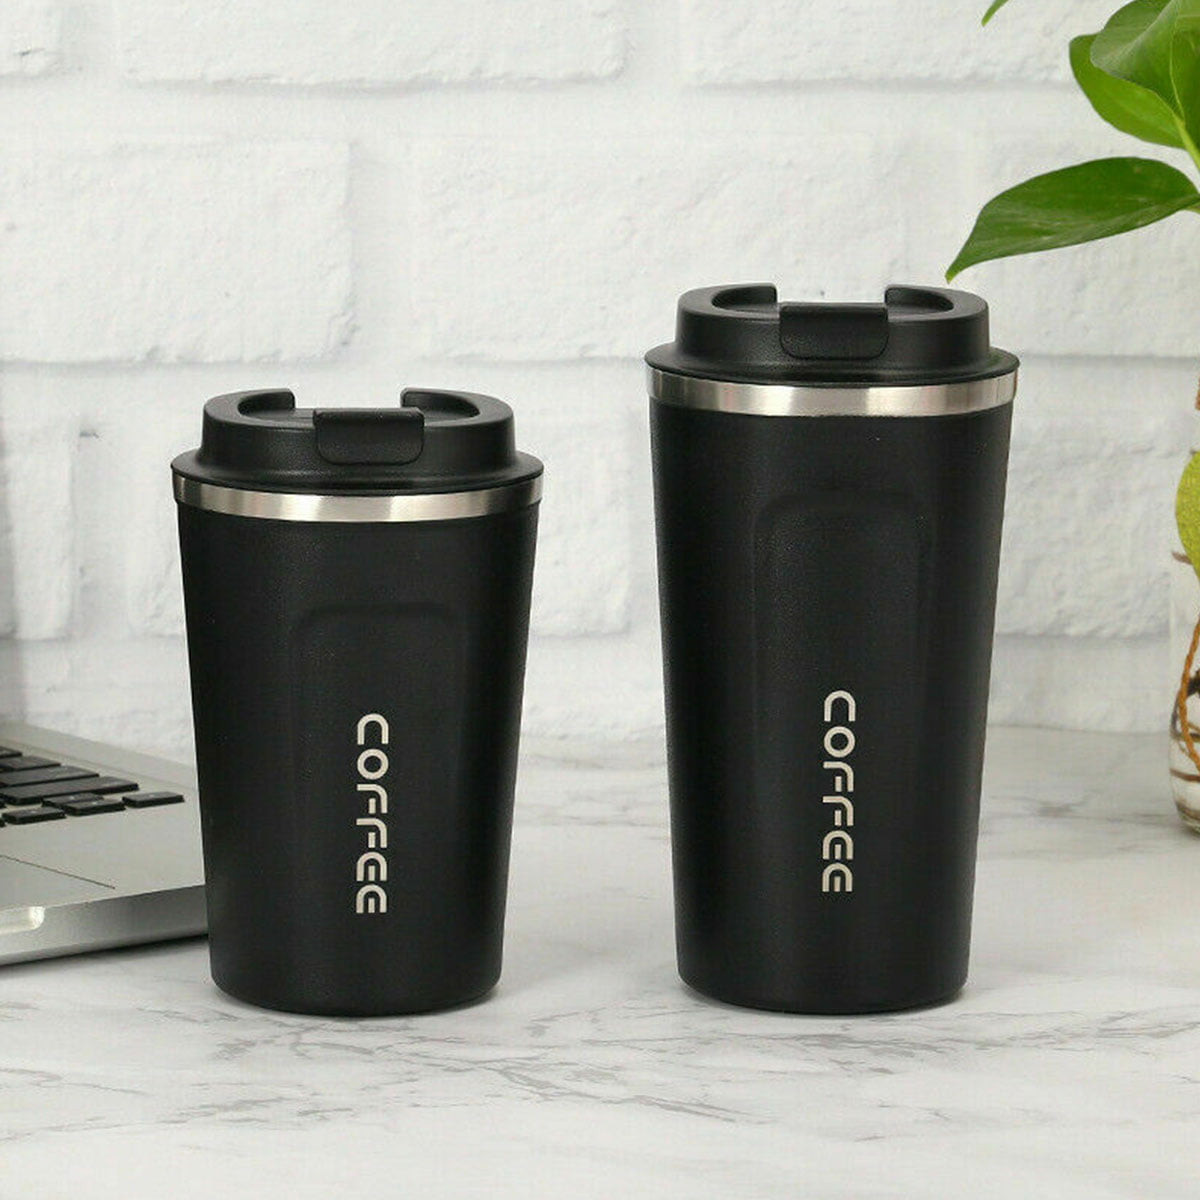 Coffee Mug to Go Stainless Steel Thermos – Thermal Mug Double Wall  Insulated – Coffee Cup with Leak-proof Lid, Reusable,Black 